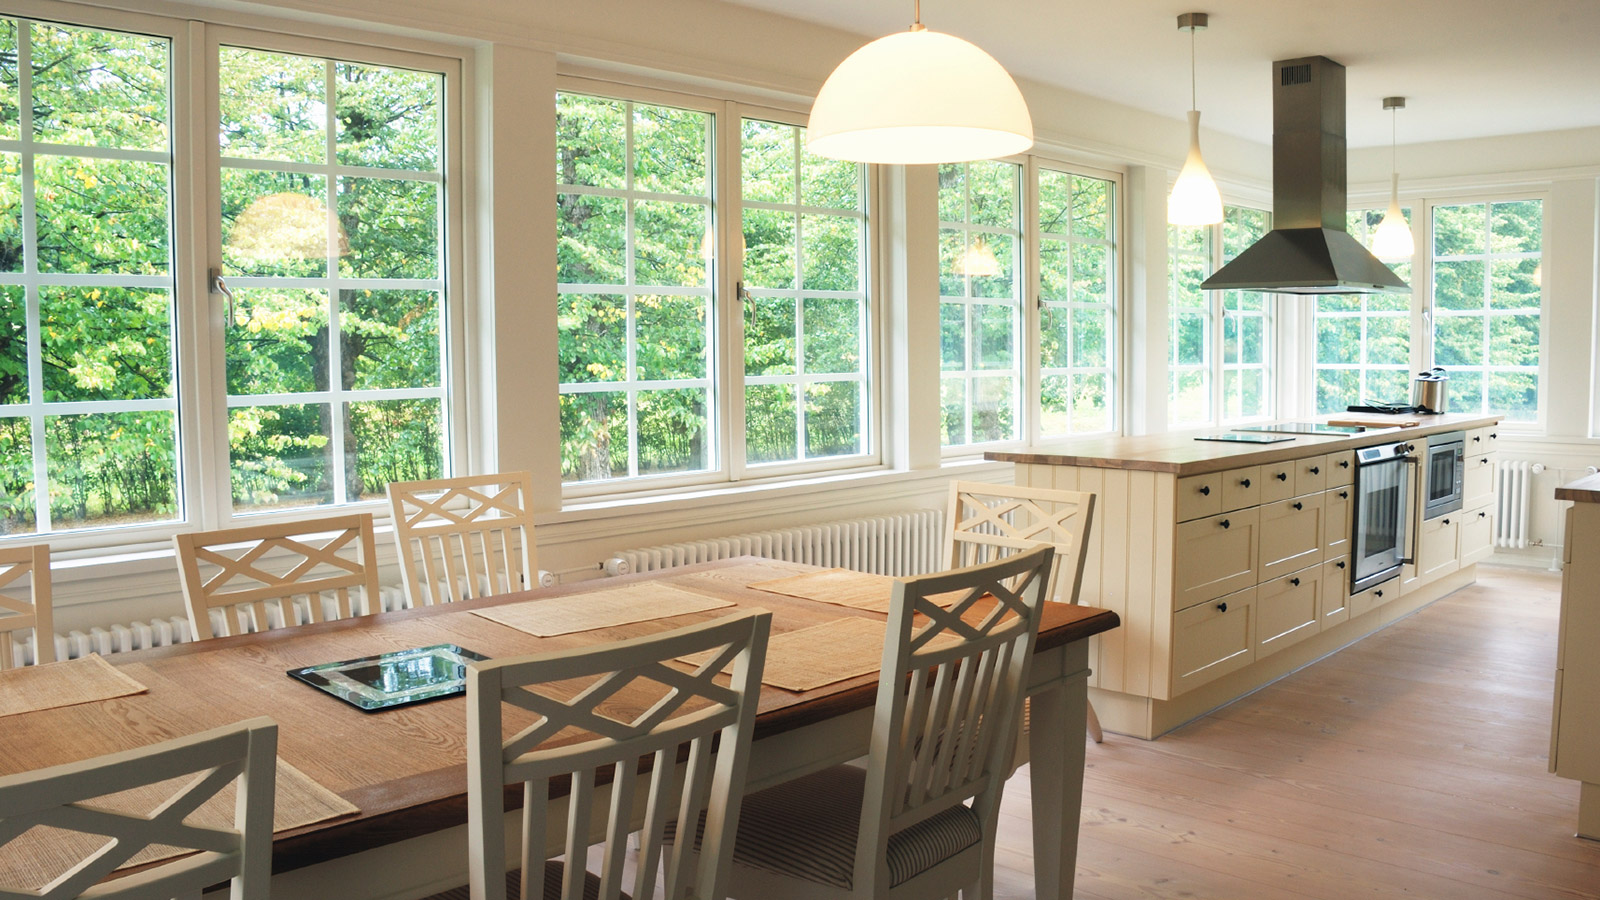 What are the benefits of replacing windows?